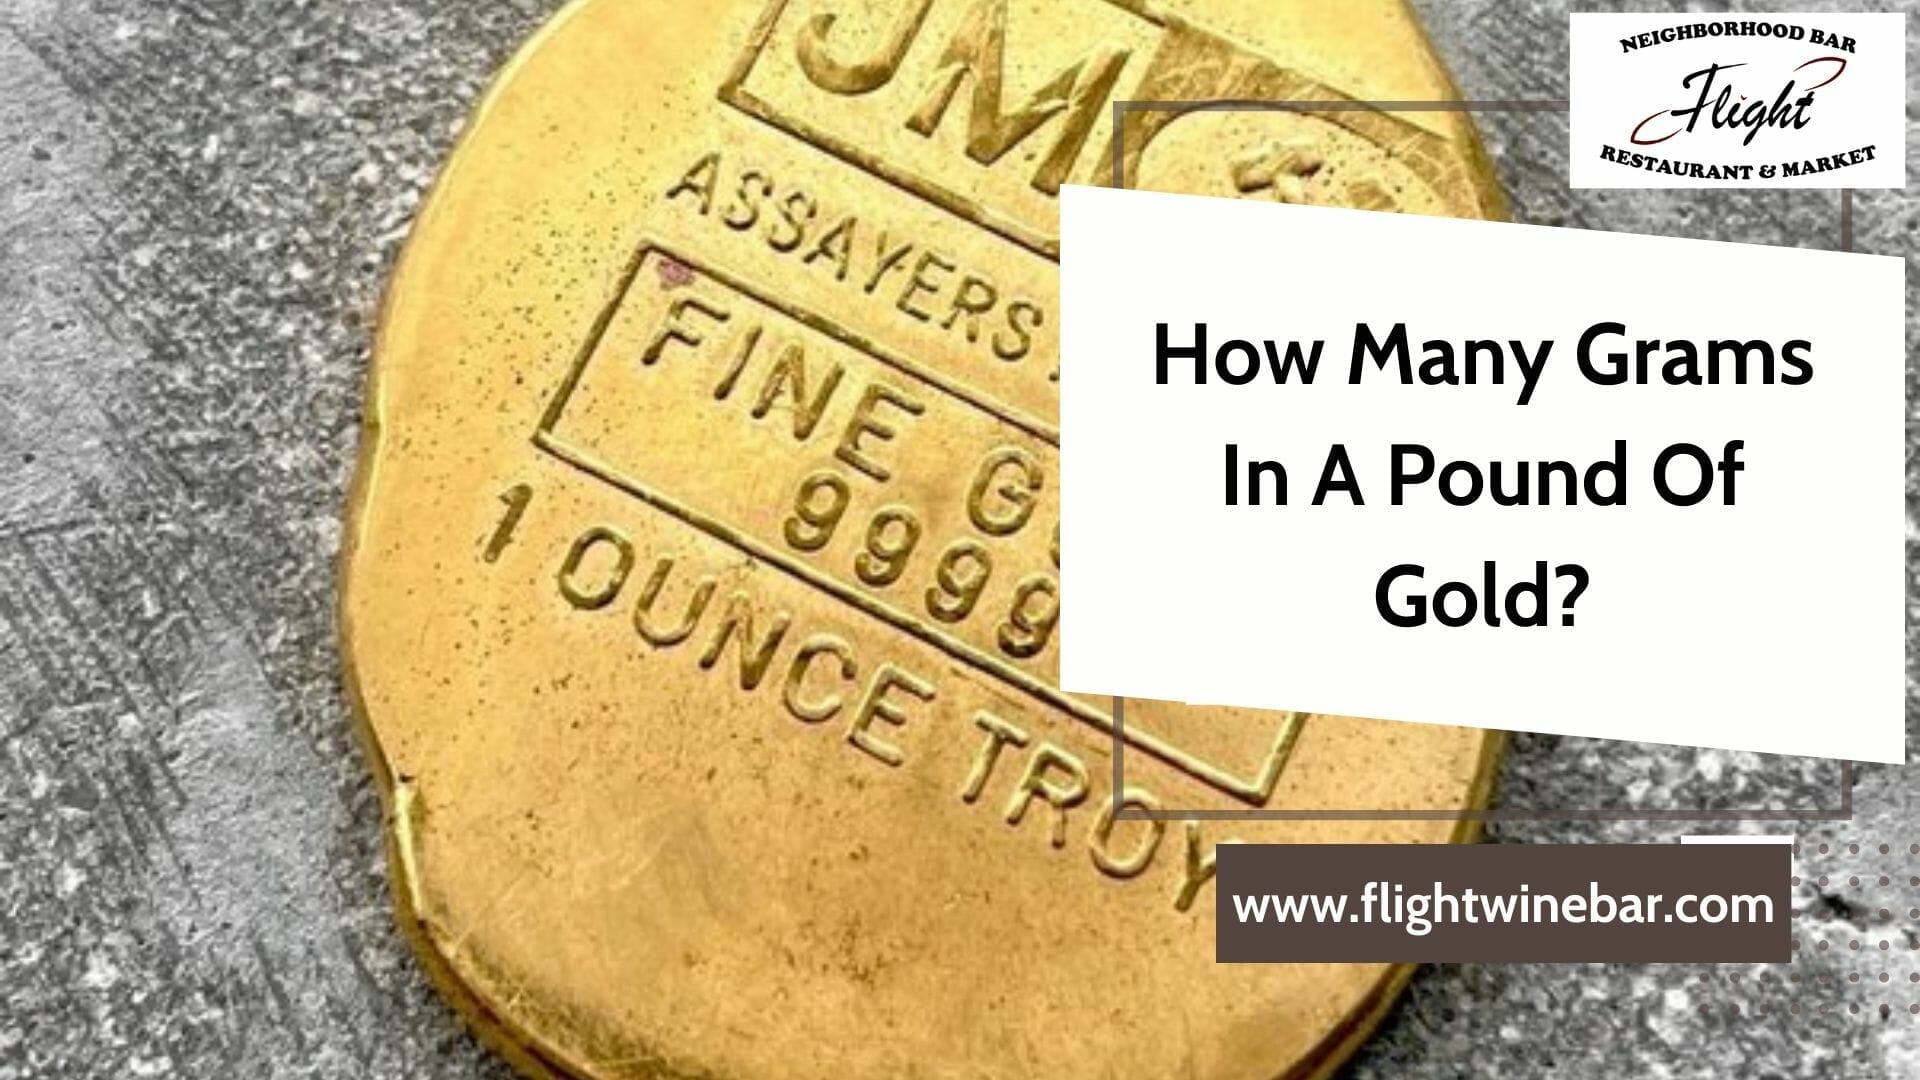 How Many Grams In A Pound Of Gold